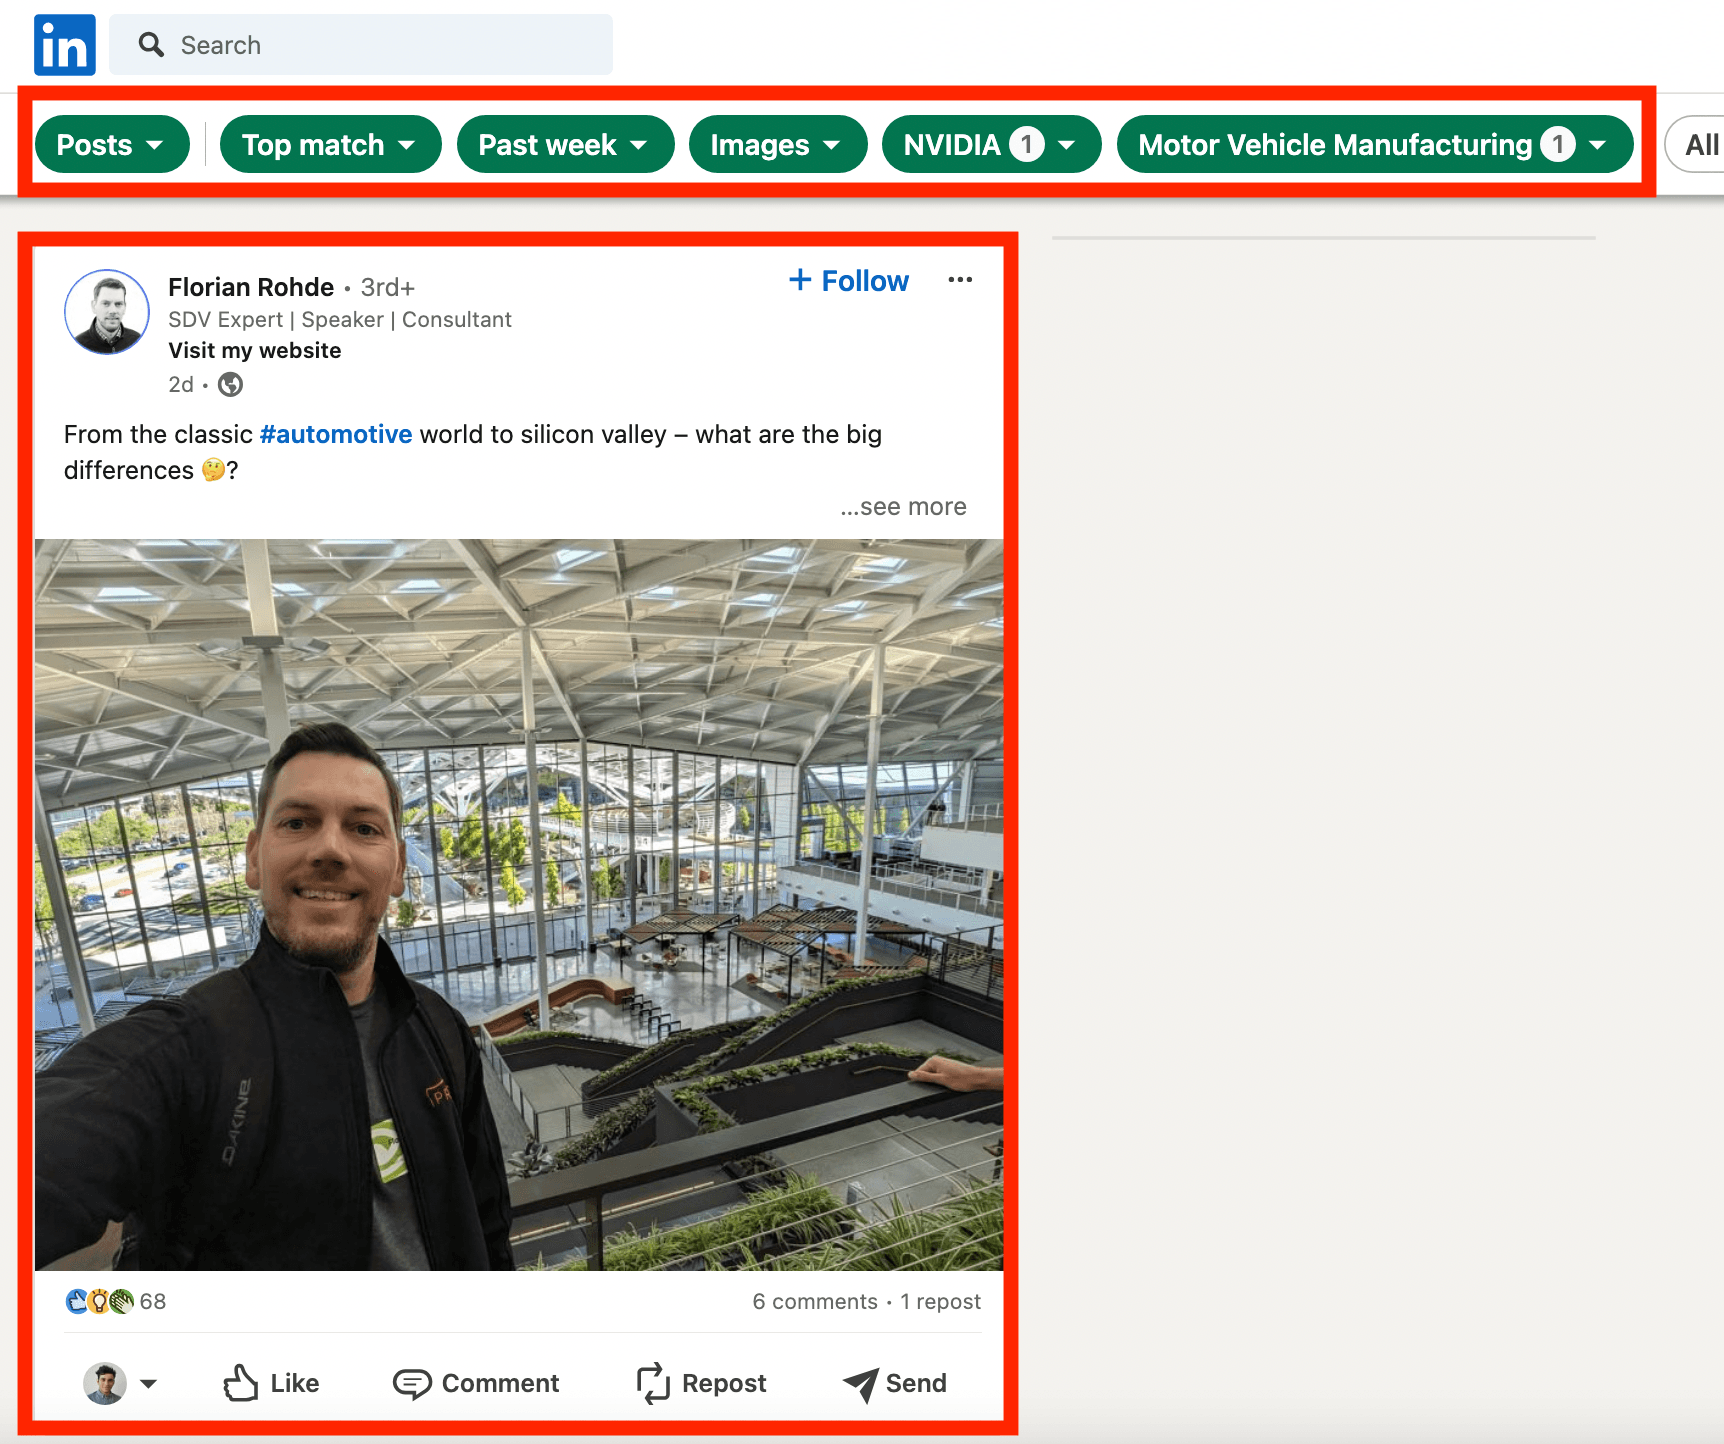 linkedin posts search example nvidia chatgpt - image18.png